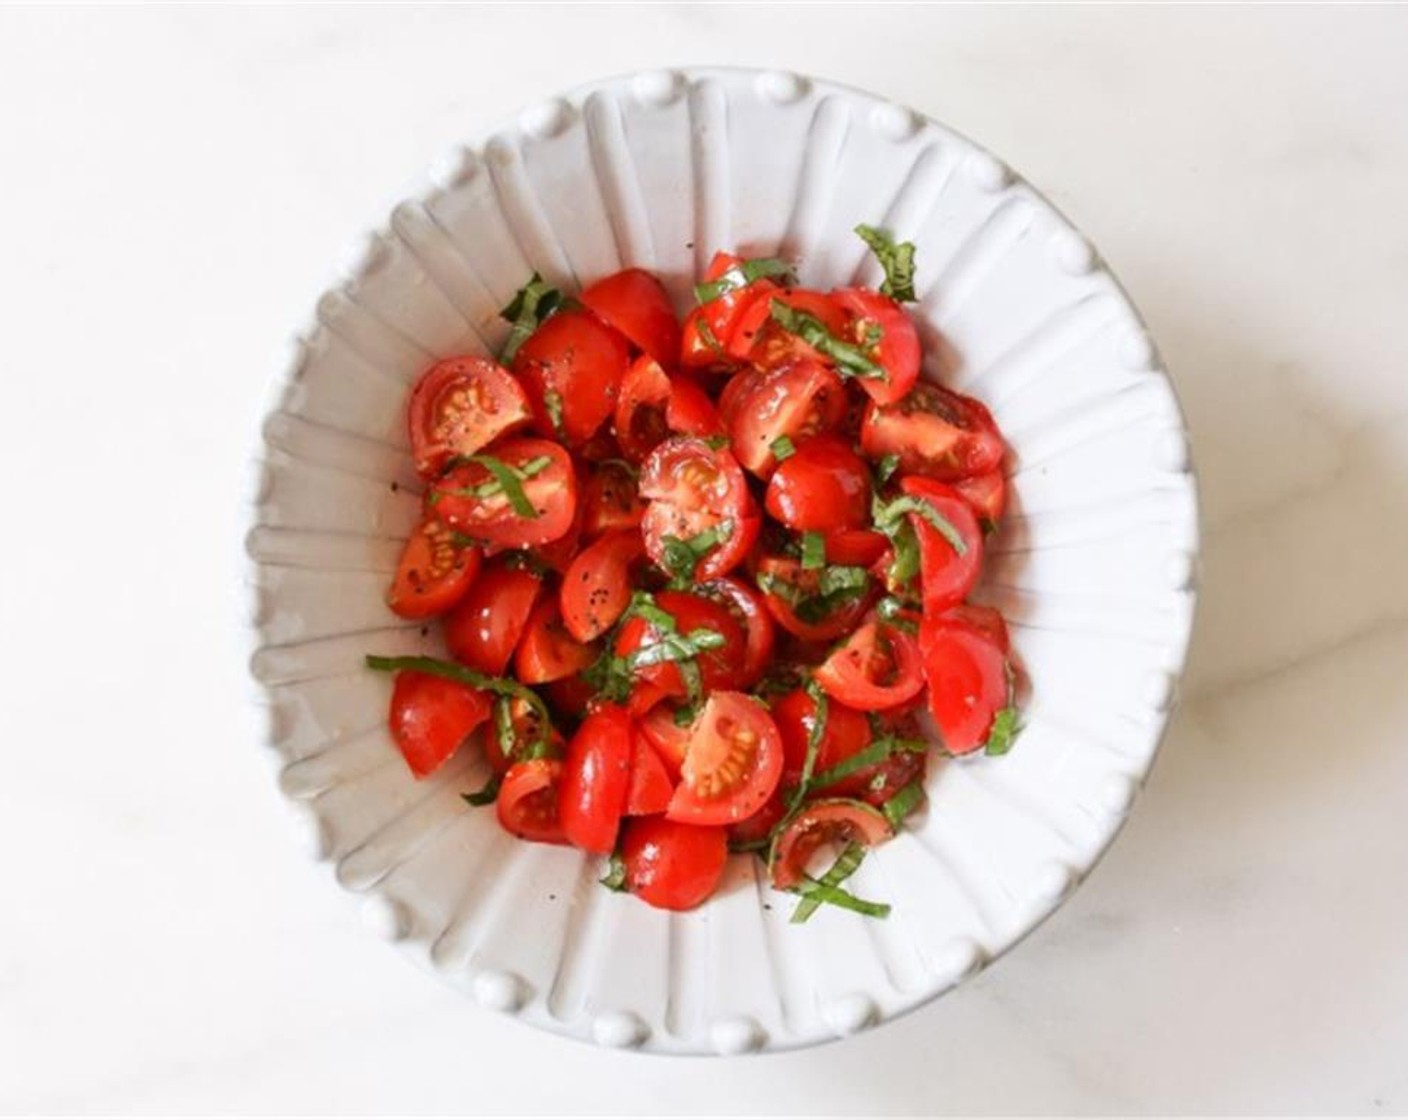 step 1 In a small bowl, combine the Cherry Tomato (1 cup), Olive Oil (1 Tbsp), and Fresh Basil Leaves (8). Season with Kosher Salt (to taste) and Freshly Ground Black Pepper (to taste), and briefly set that deliciousness aside.